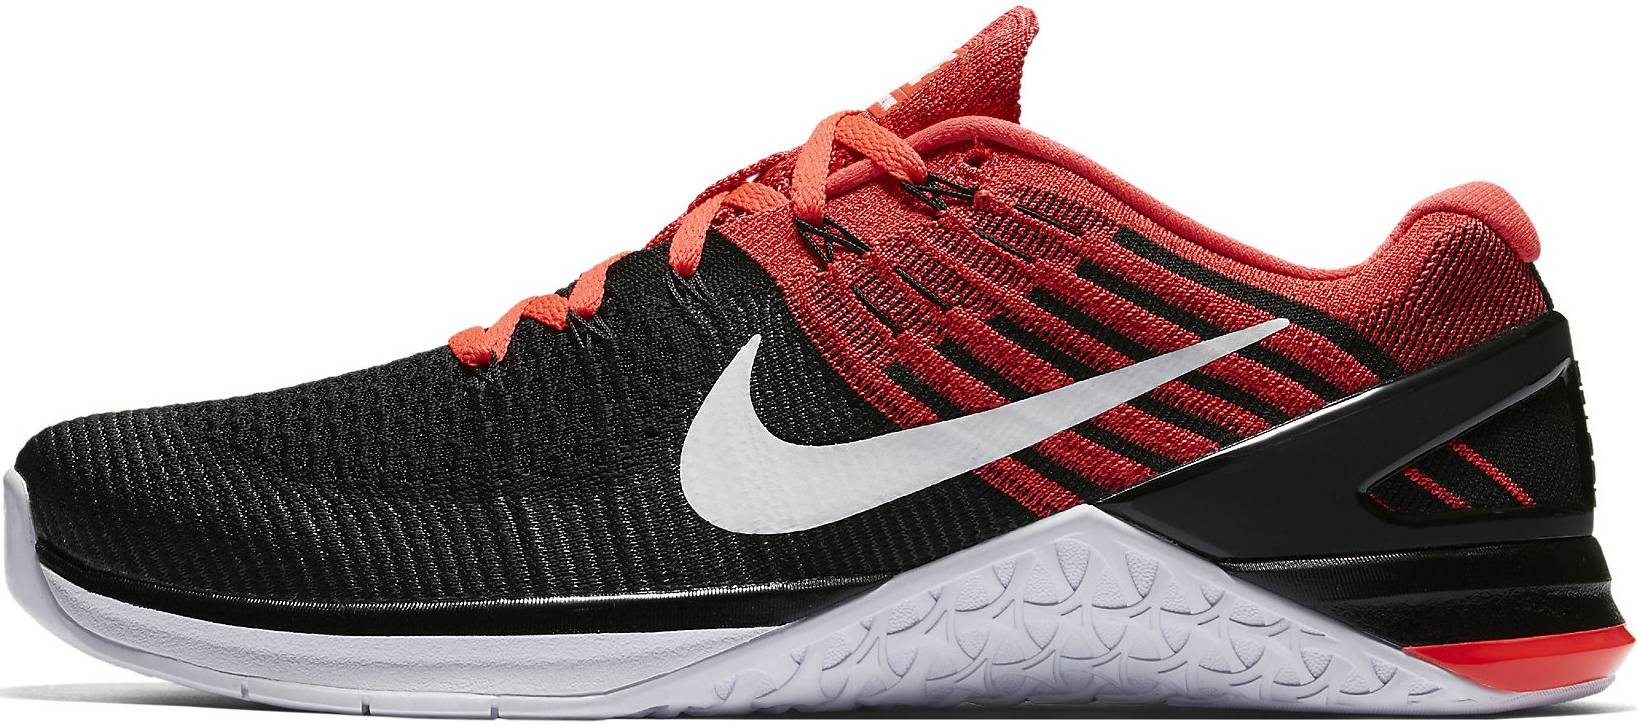 Save 48% on Nike Crossfit Shoes (17 